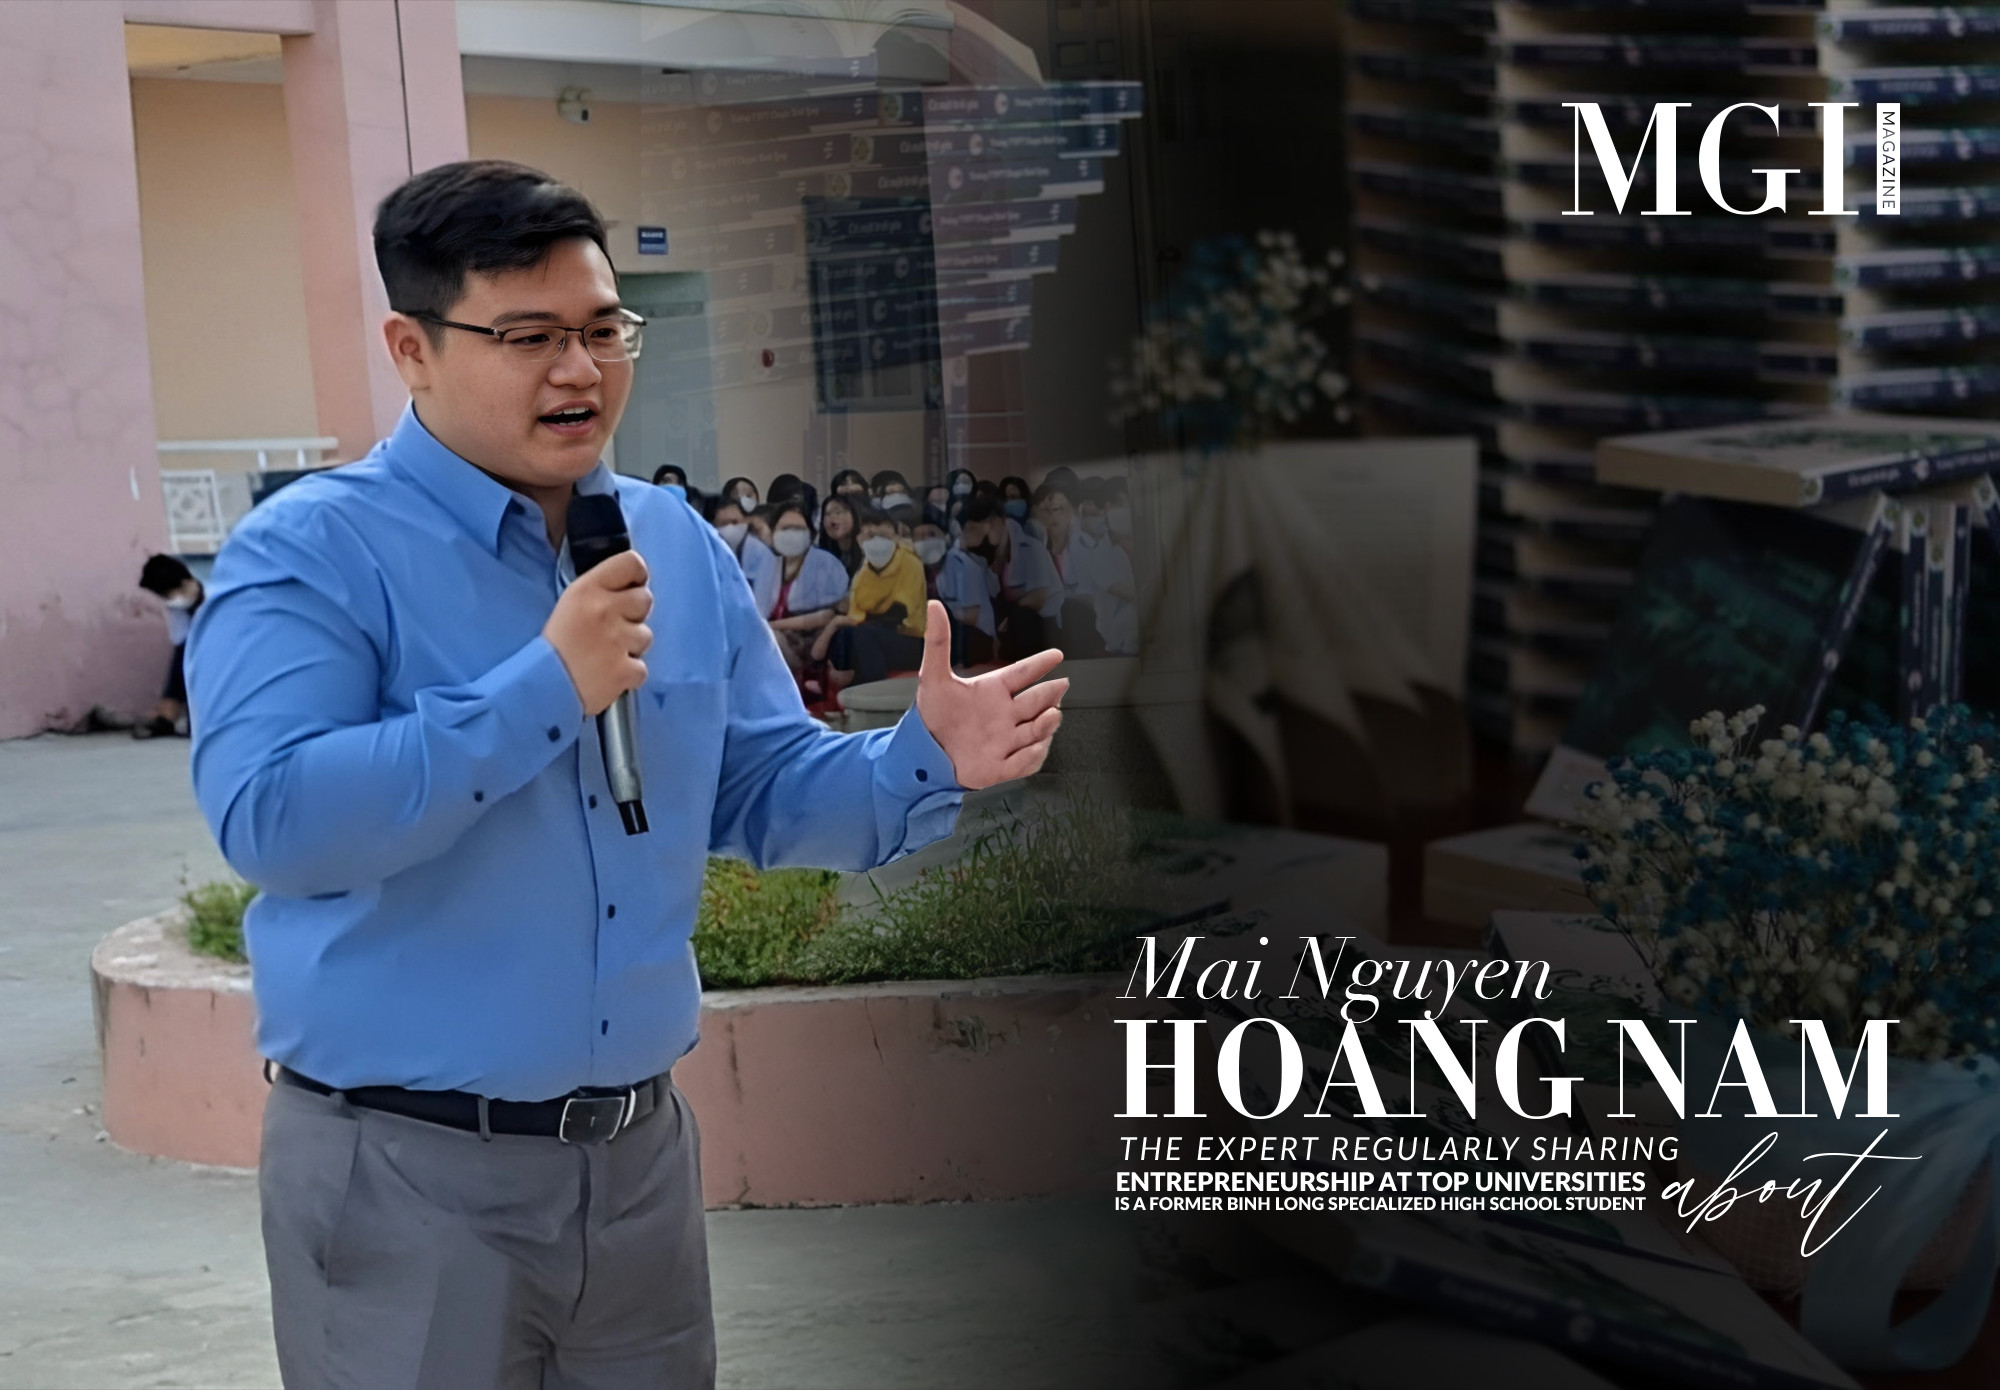 Mai Nguyen Hoang Nam - The expert regularly sharing about Entrepreneurship at top universities is a Former Binh Long Specialized High School student